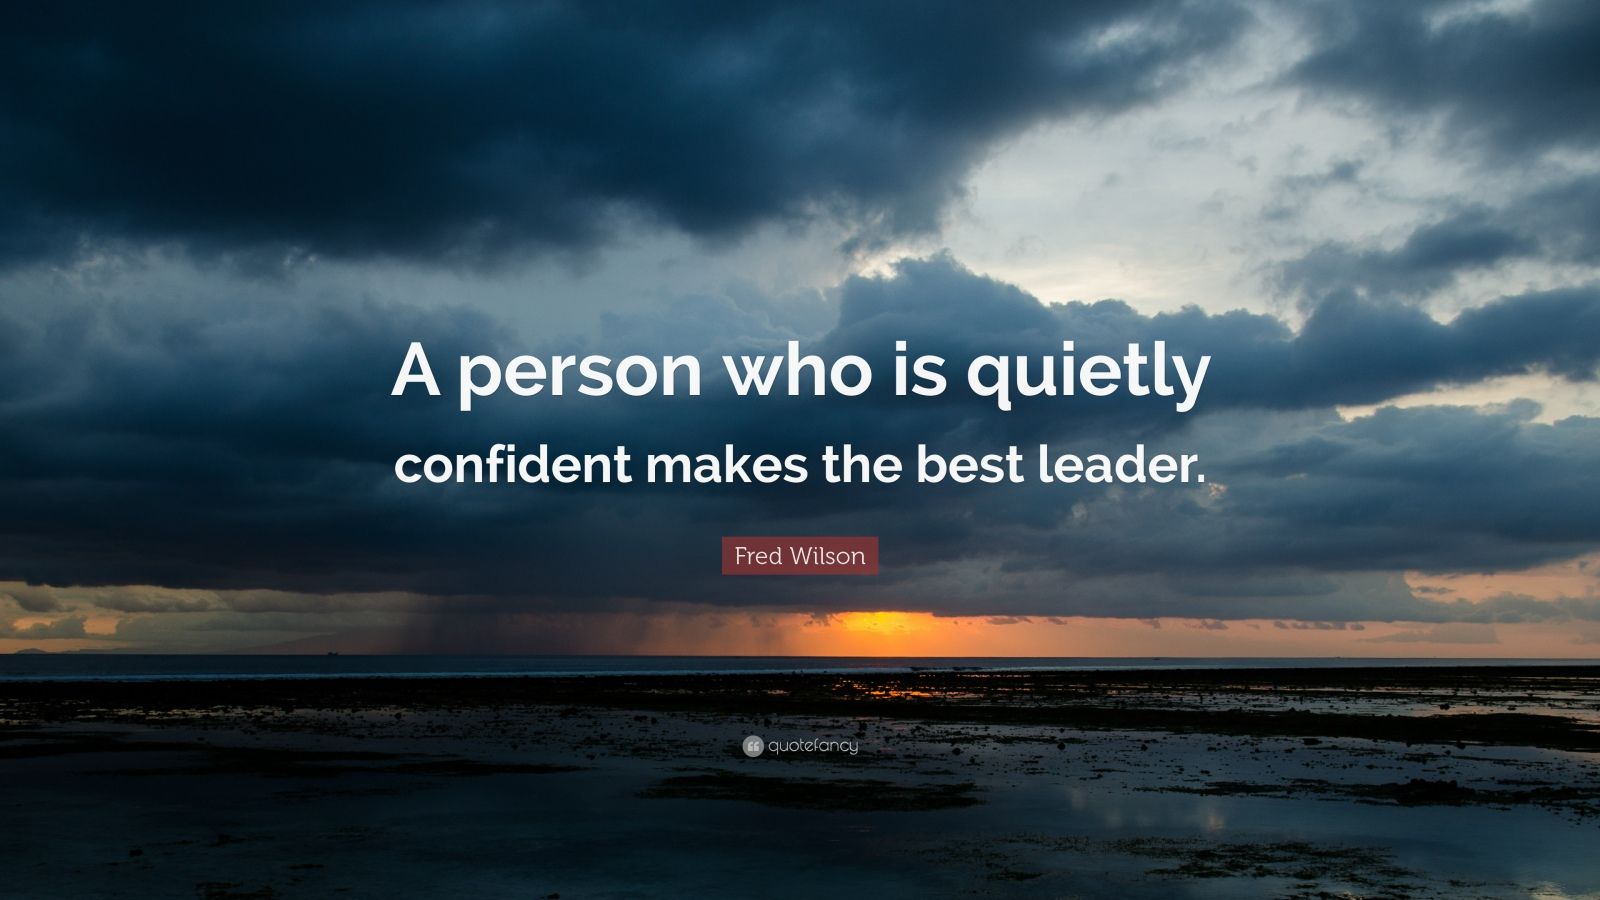 Leadership Quotes (100 wallpapers) - Quotefancy6 日前